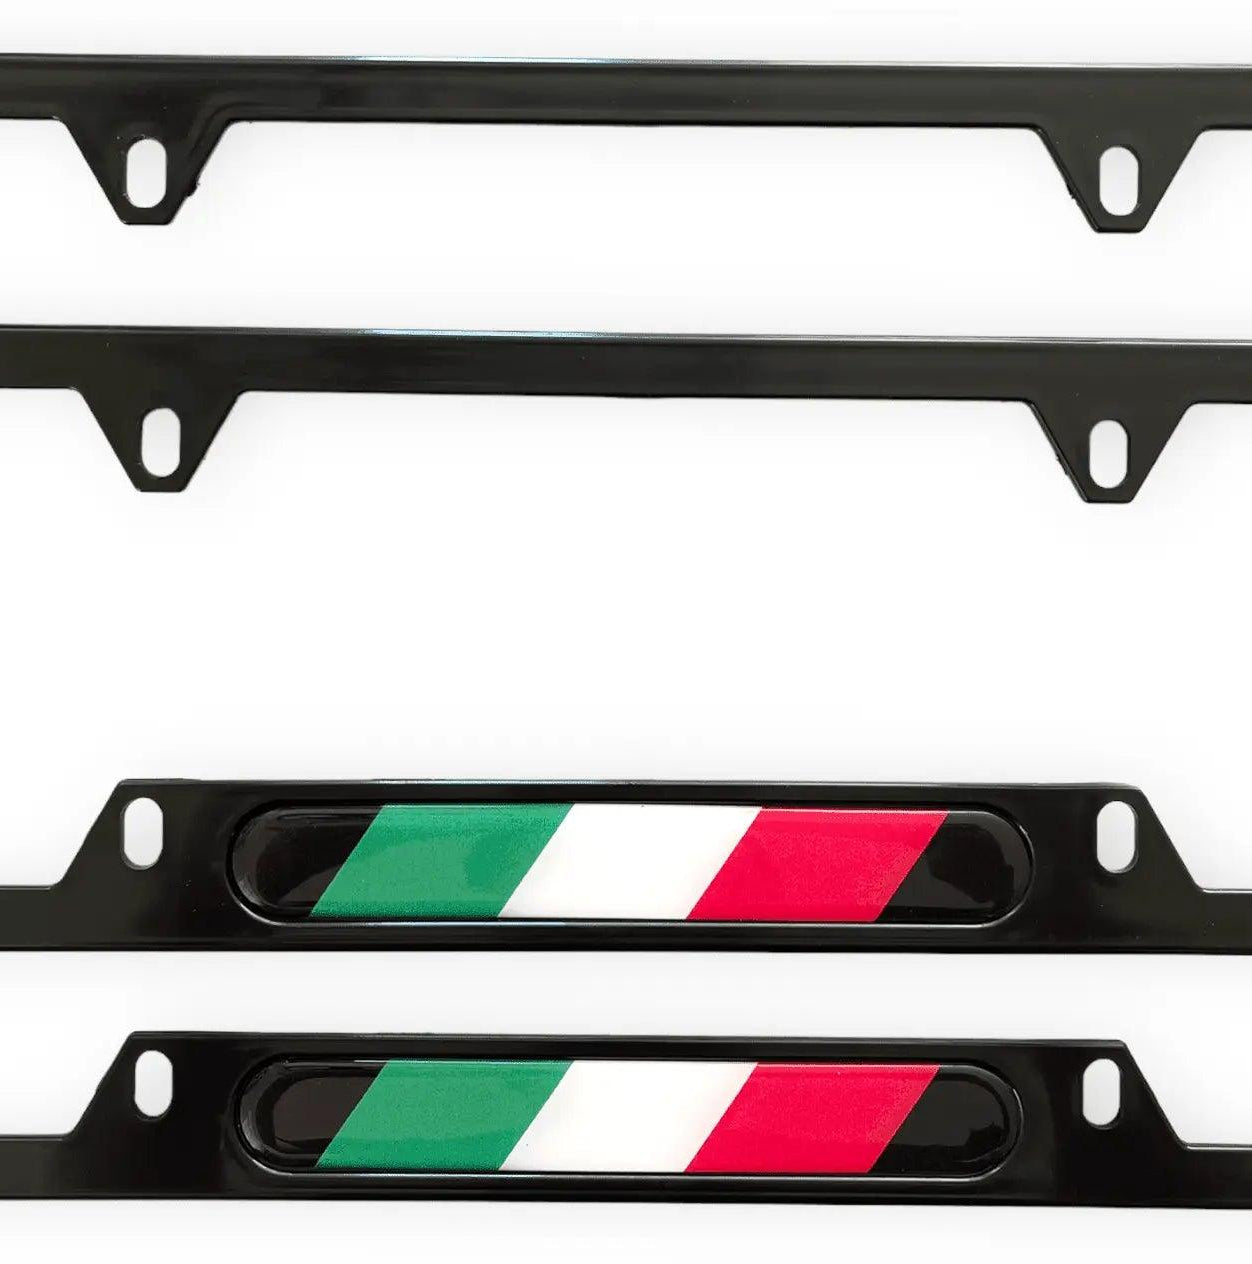 Autowin Number Plate Holder USA Standard Size Italy Flag